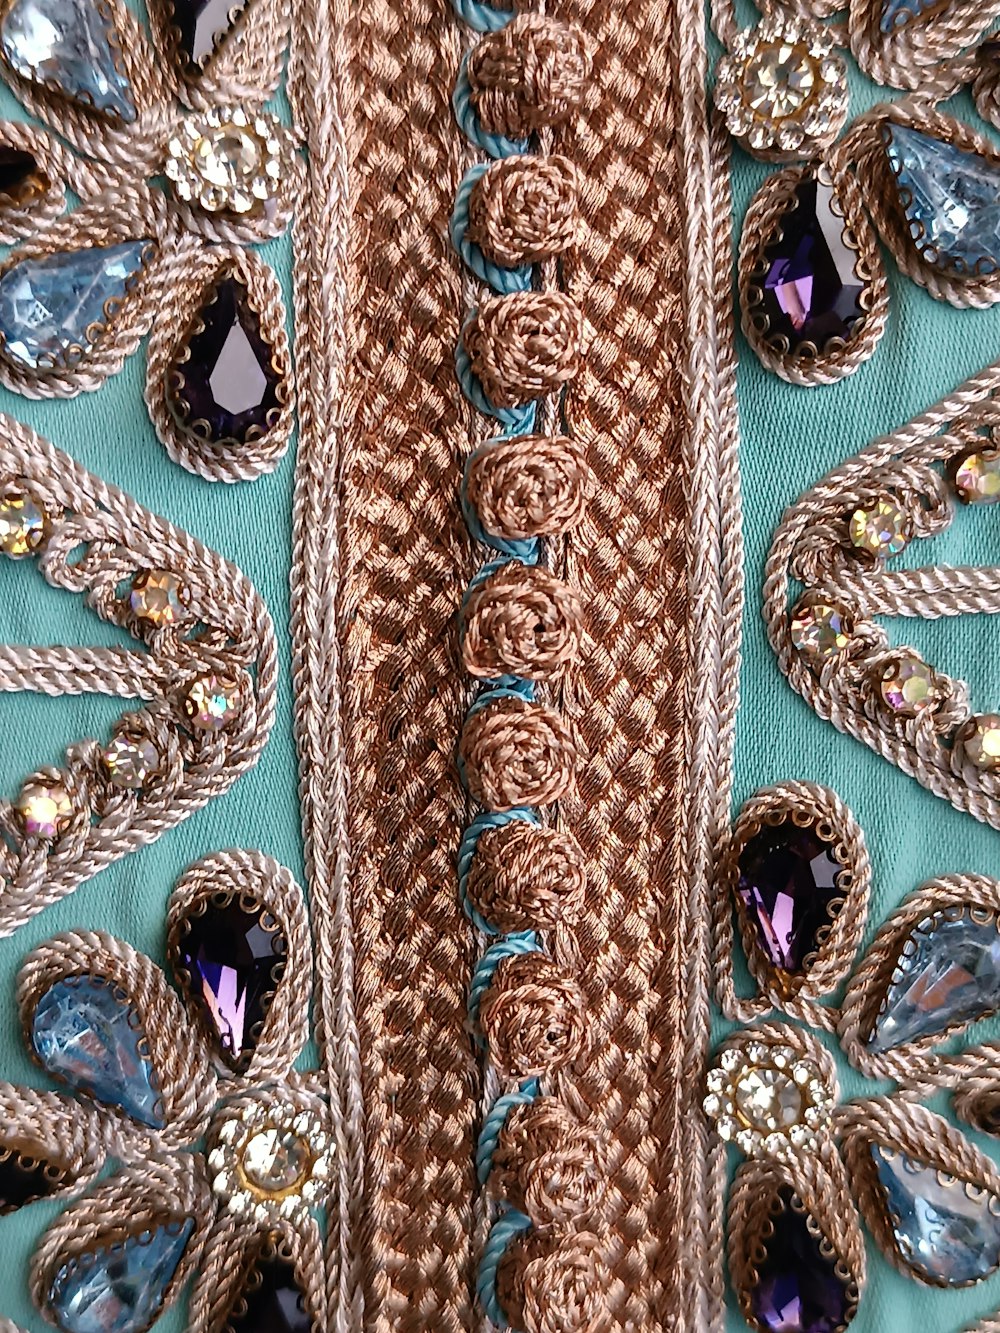 a close up of a piece of clothing with beads